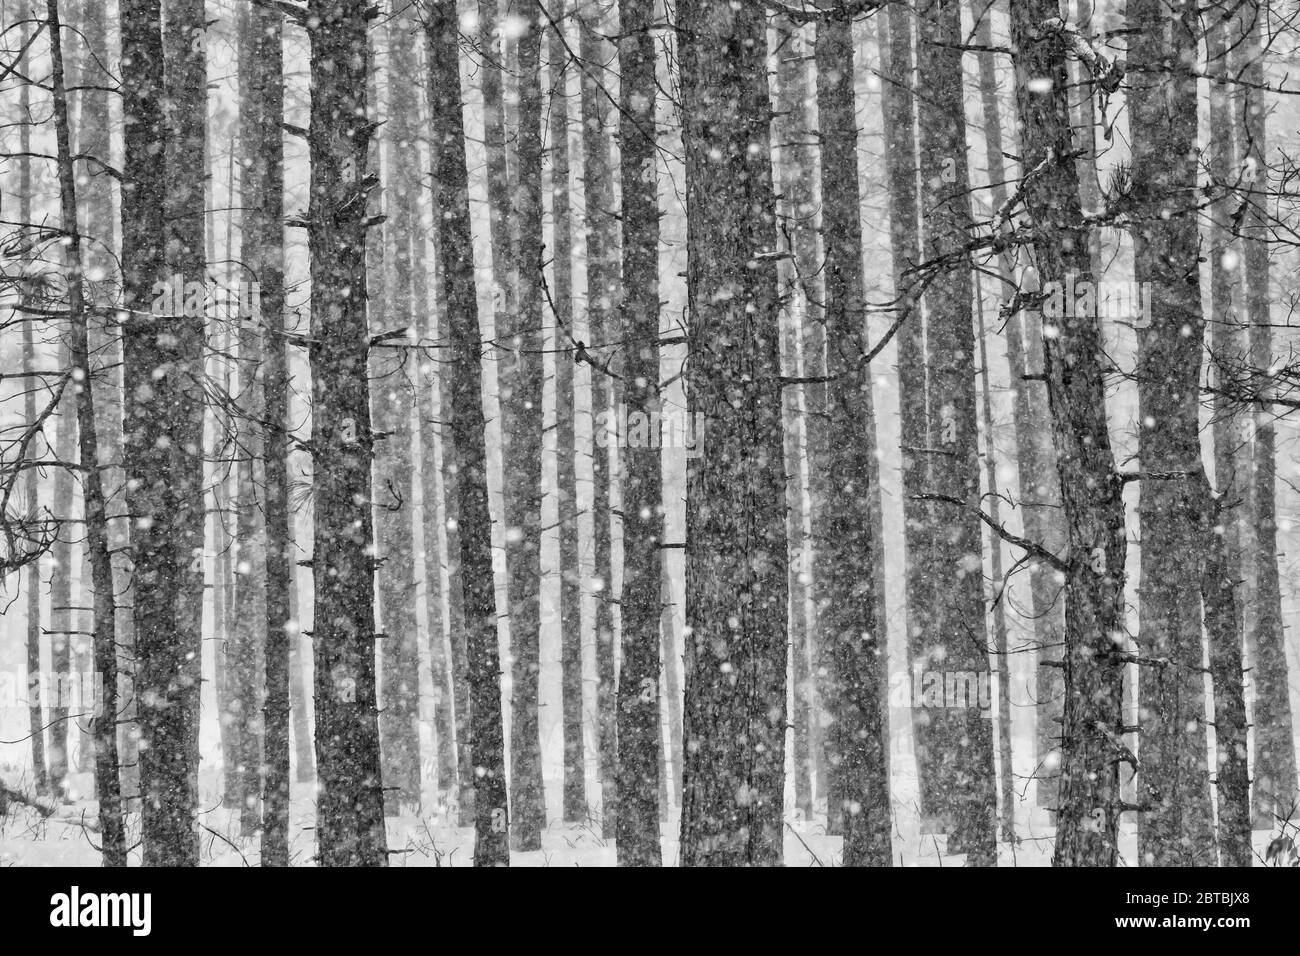 Snowflakes heavily falling in a Red Pine, Pinus resinosa, plantation during an April snowstorm in central Michigan, USA Stock Photo